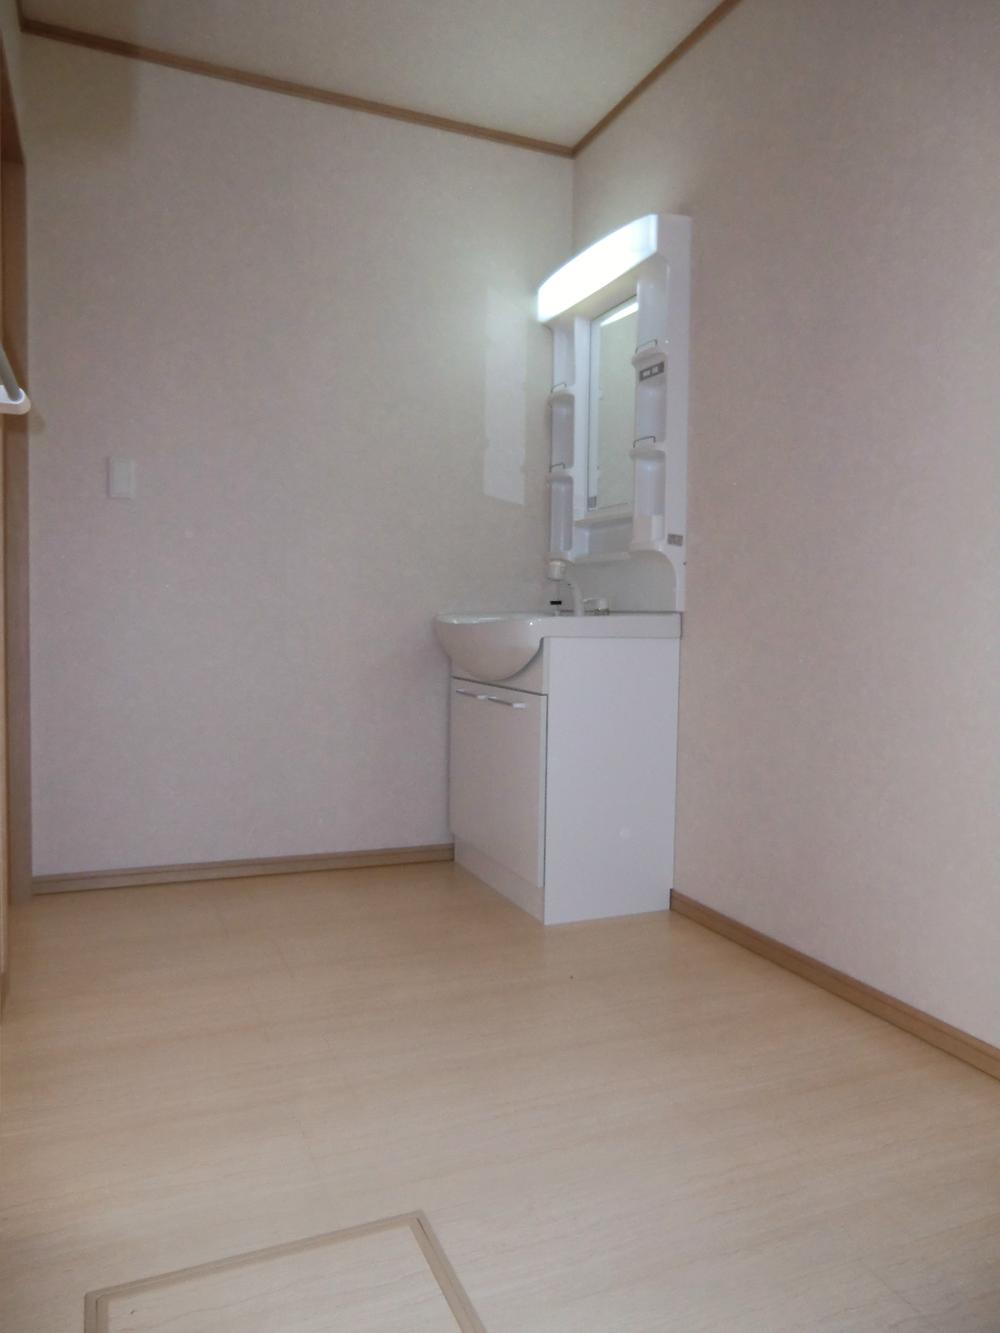 Wash basin, toilet. ◇ wash room ◇  Easy-to-use shampoo dresser  Spacious wash room  With a convenient under-floor storage 